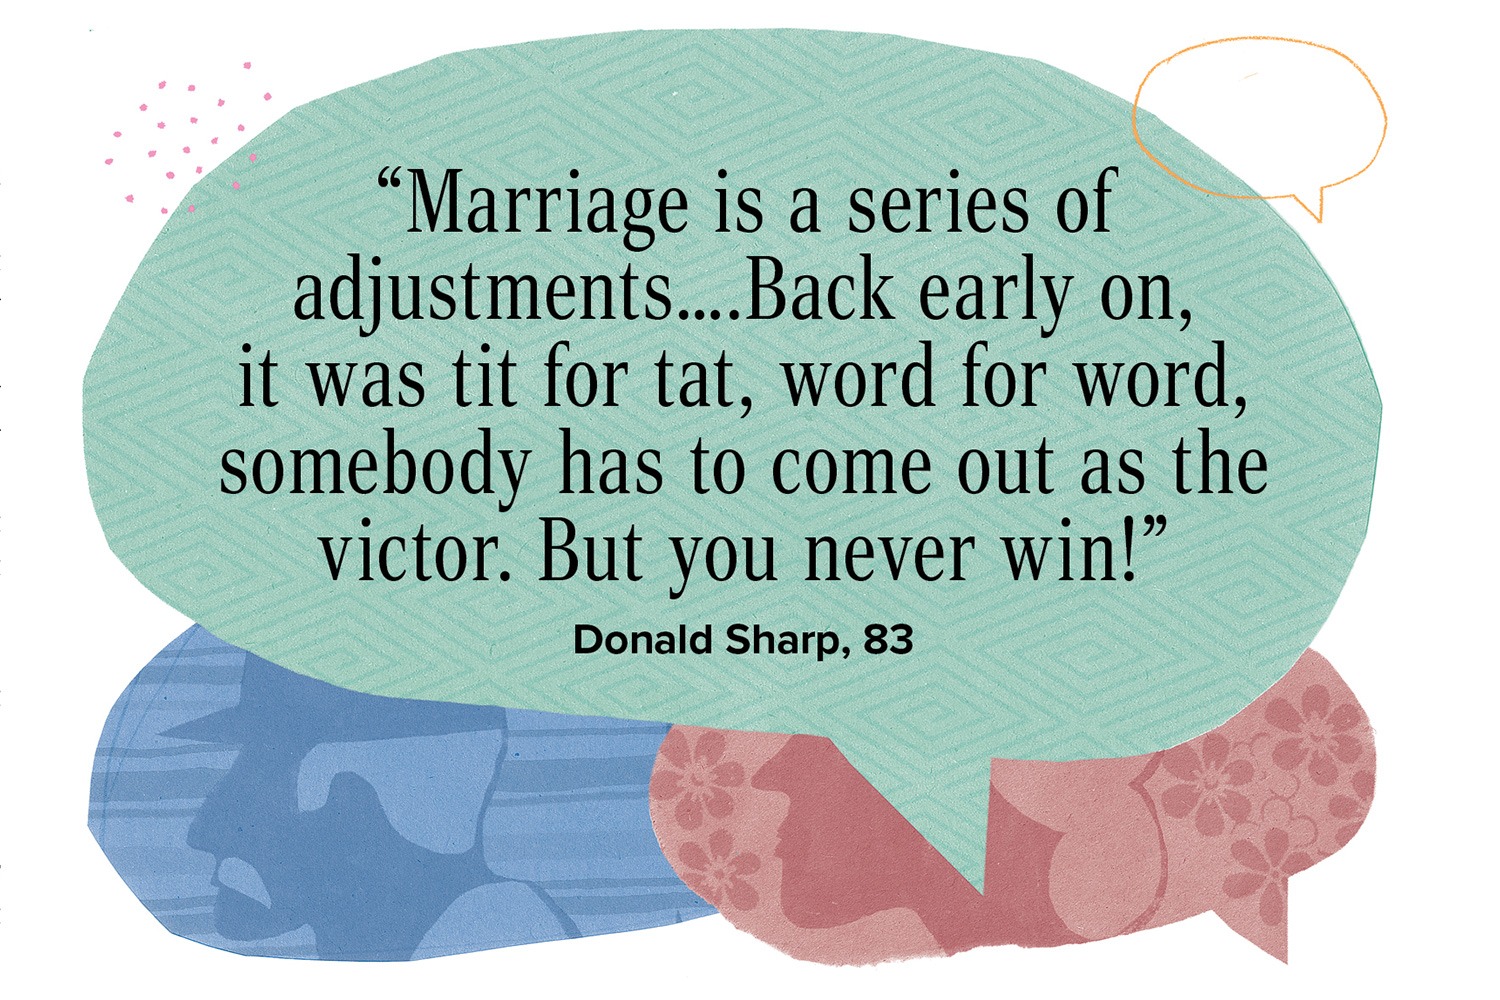 “Marriage is a series of adjustments…. Back early on, it was tit for tat, word for word, somebody has to come out as the victor. But you never win!” Donald Sharp, 83